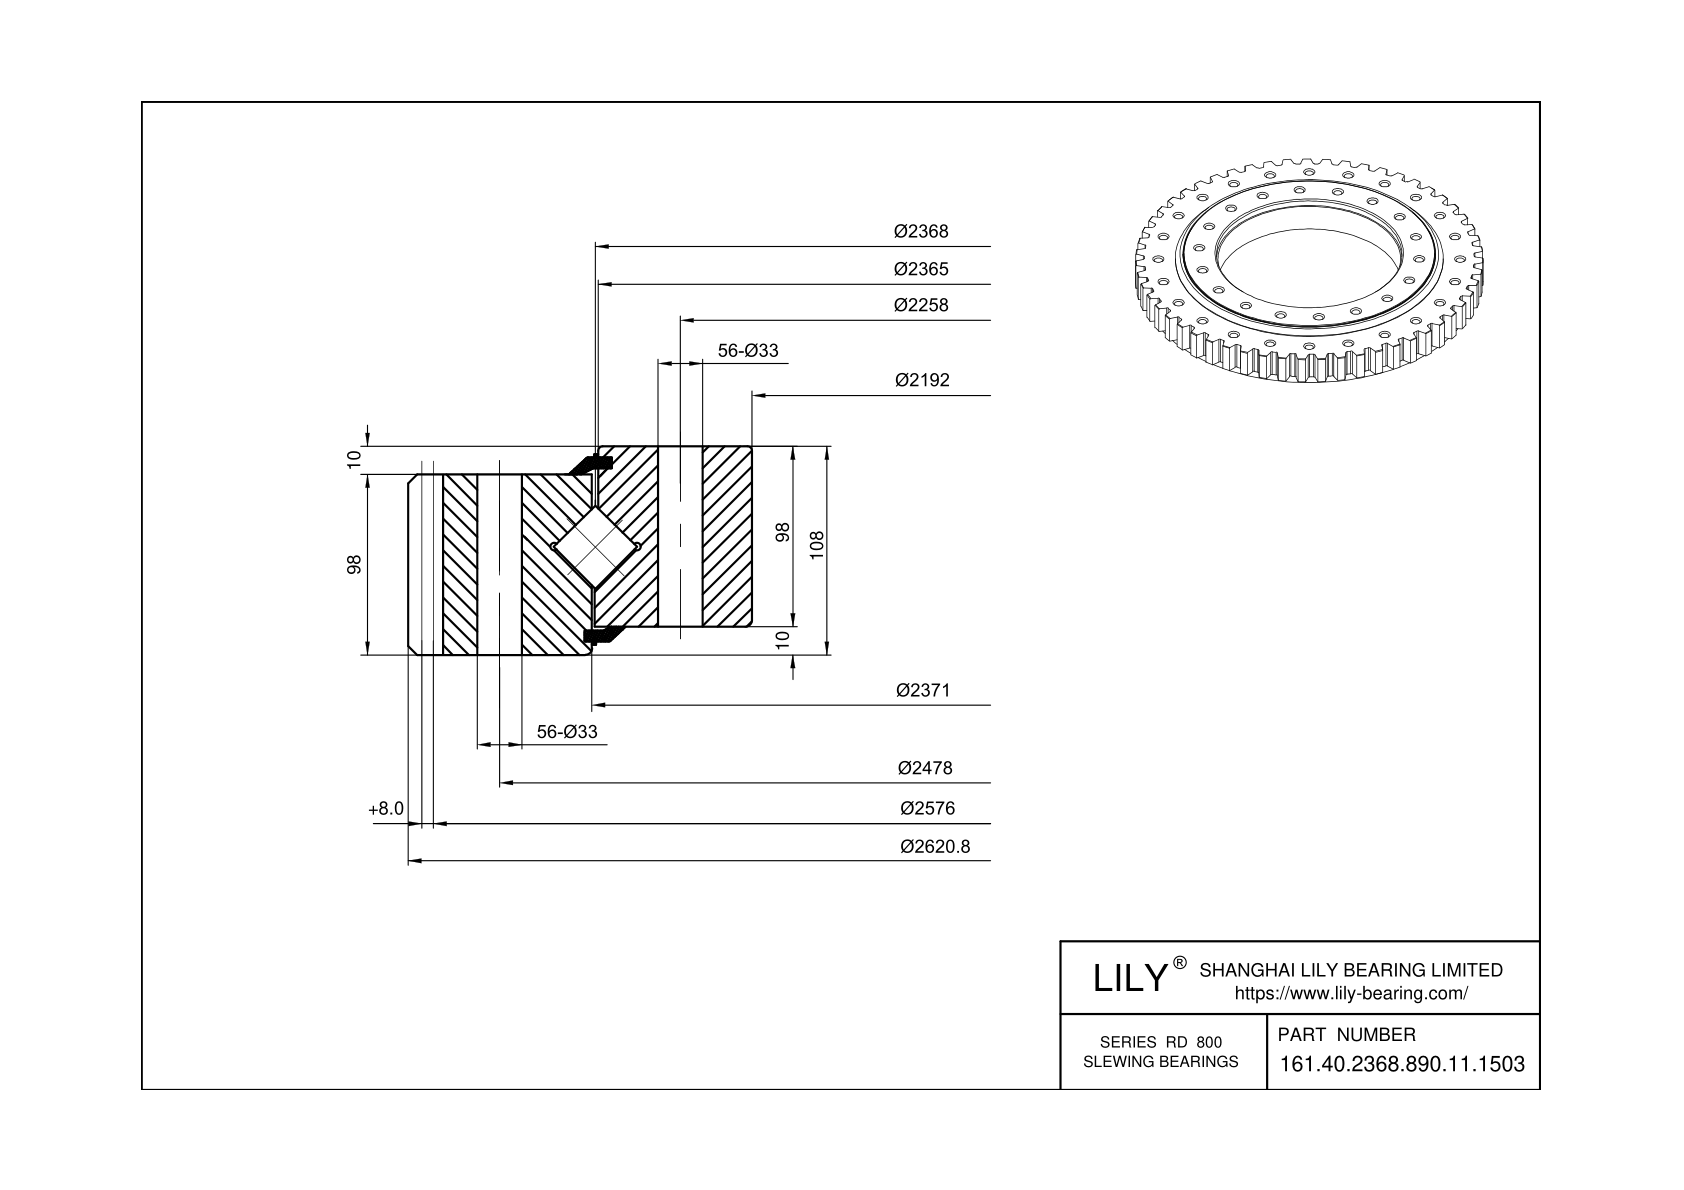 161.40.2368.890.11.1503 Cross Roller Slewing Ring Bearing cad drawing